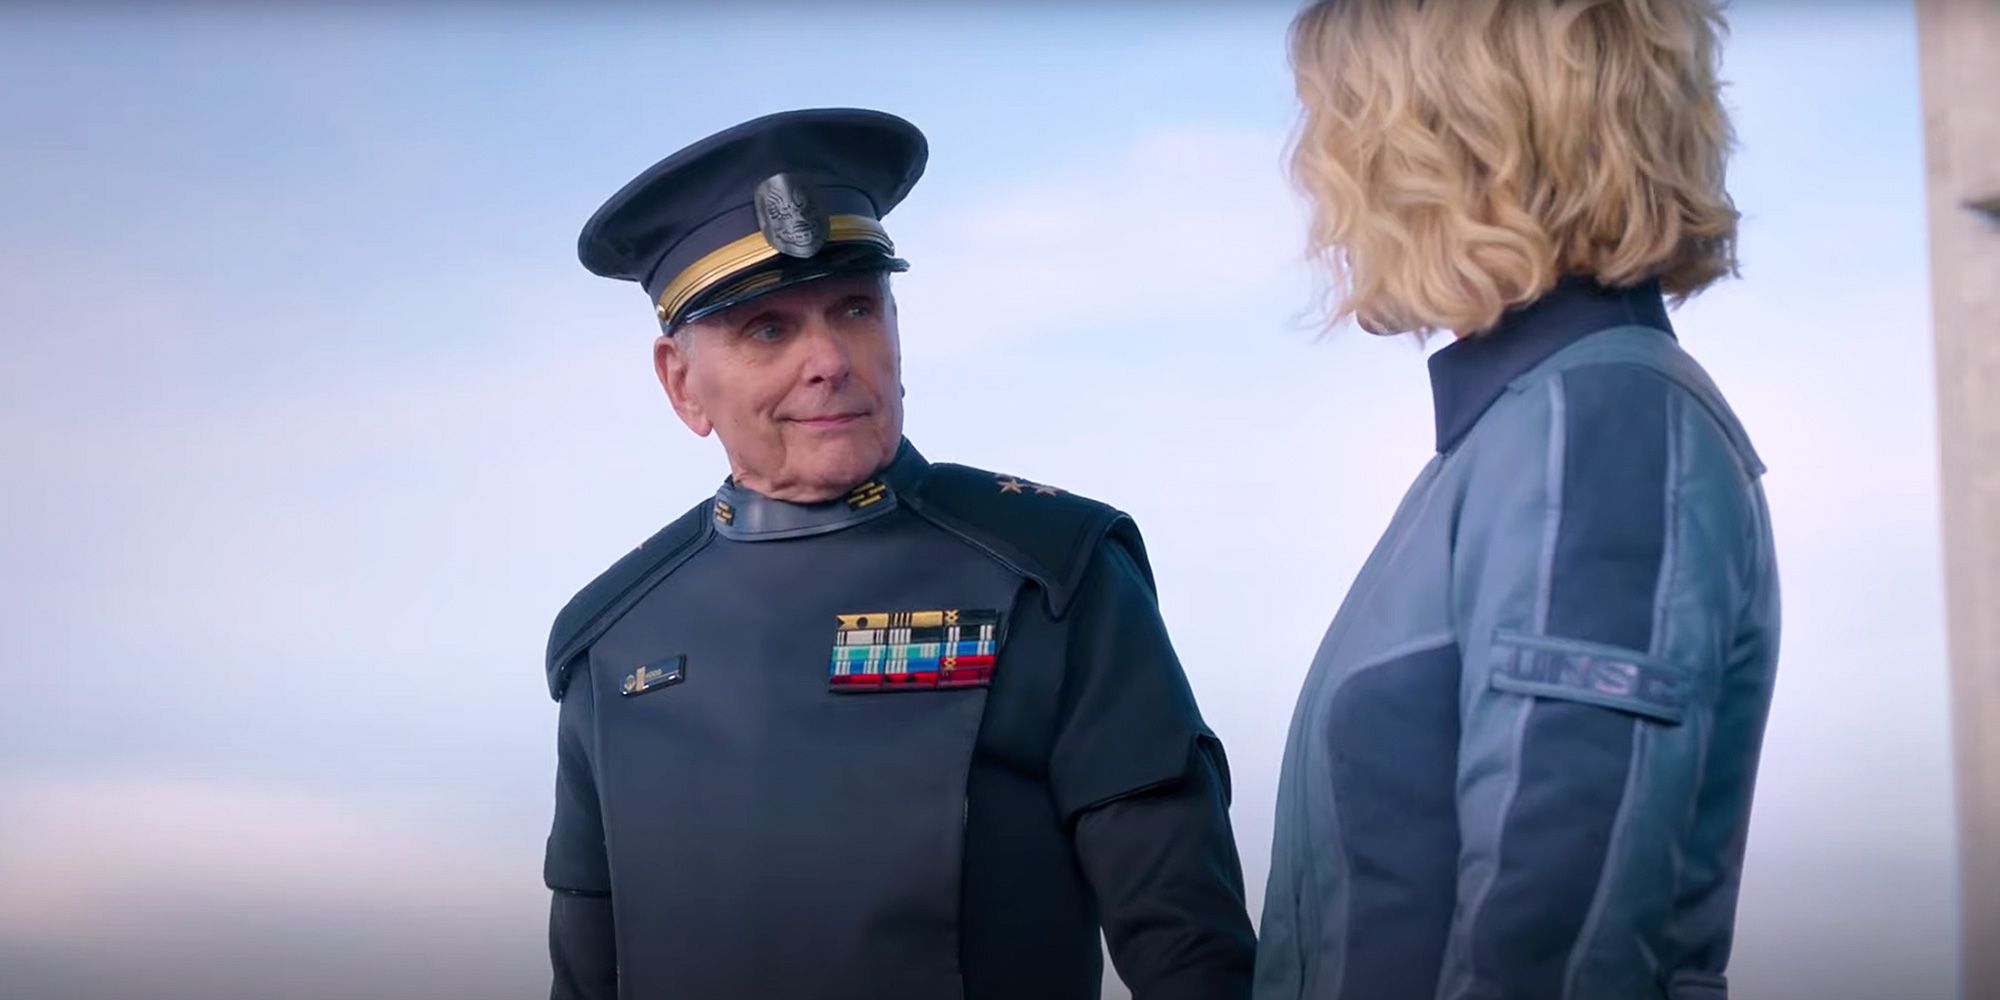 Halo Episode 2 Clip Shows Dr. Halsey Planning To Deal With Master